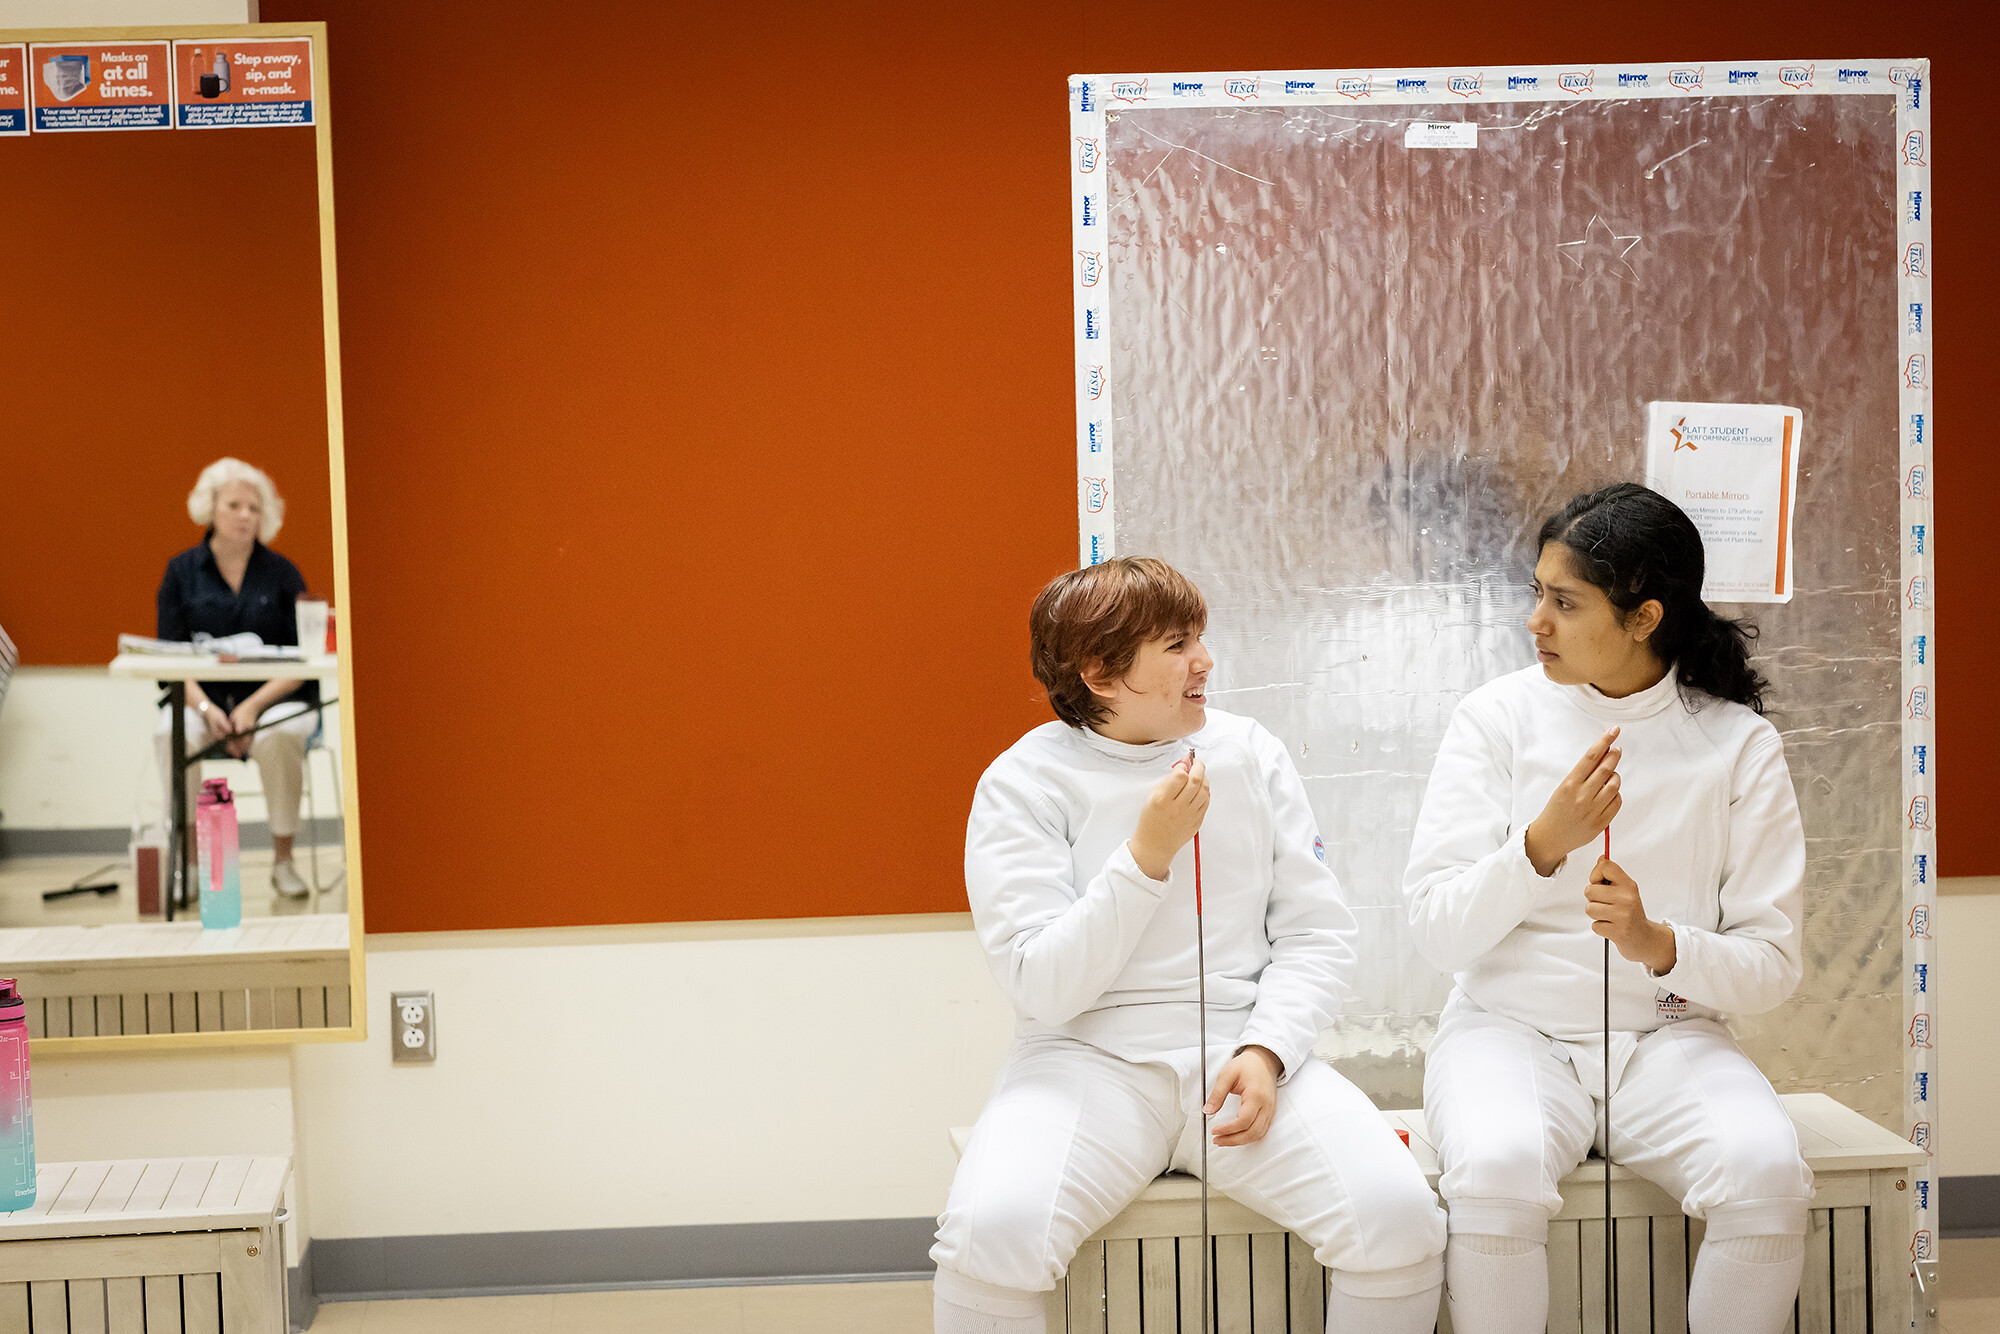 Two actors seated during play rehearsal  in fencing gear with a director’s reflection in a mirror.